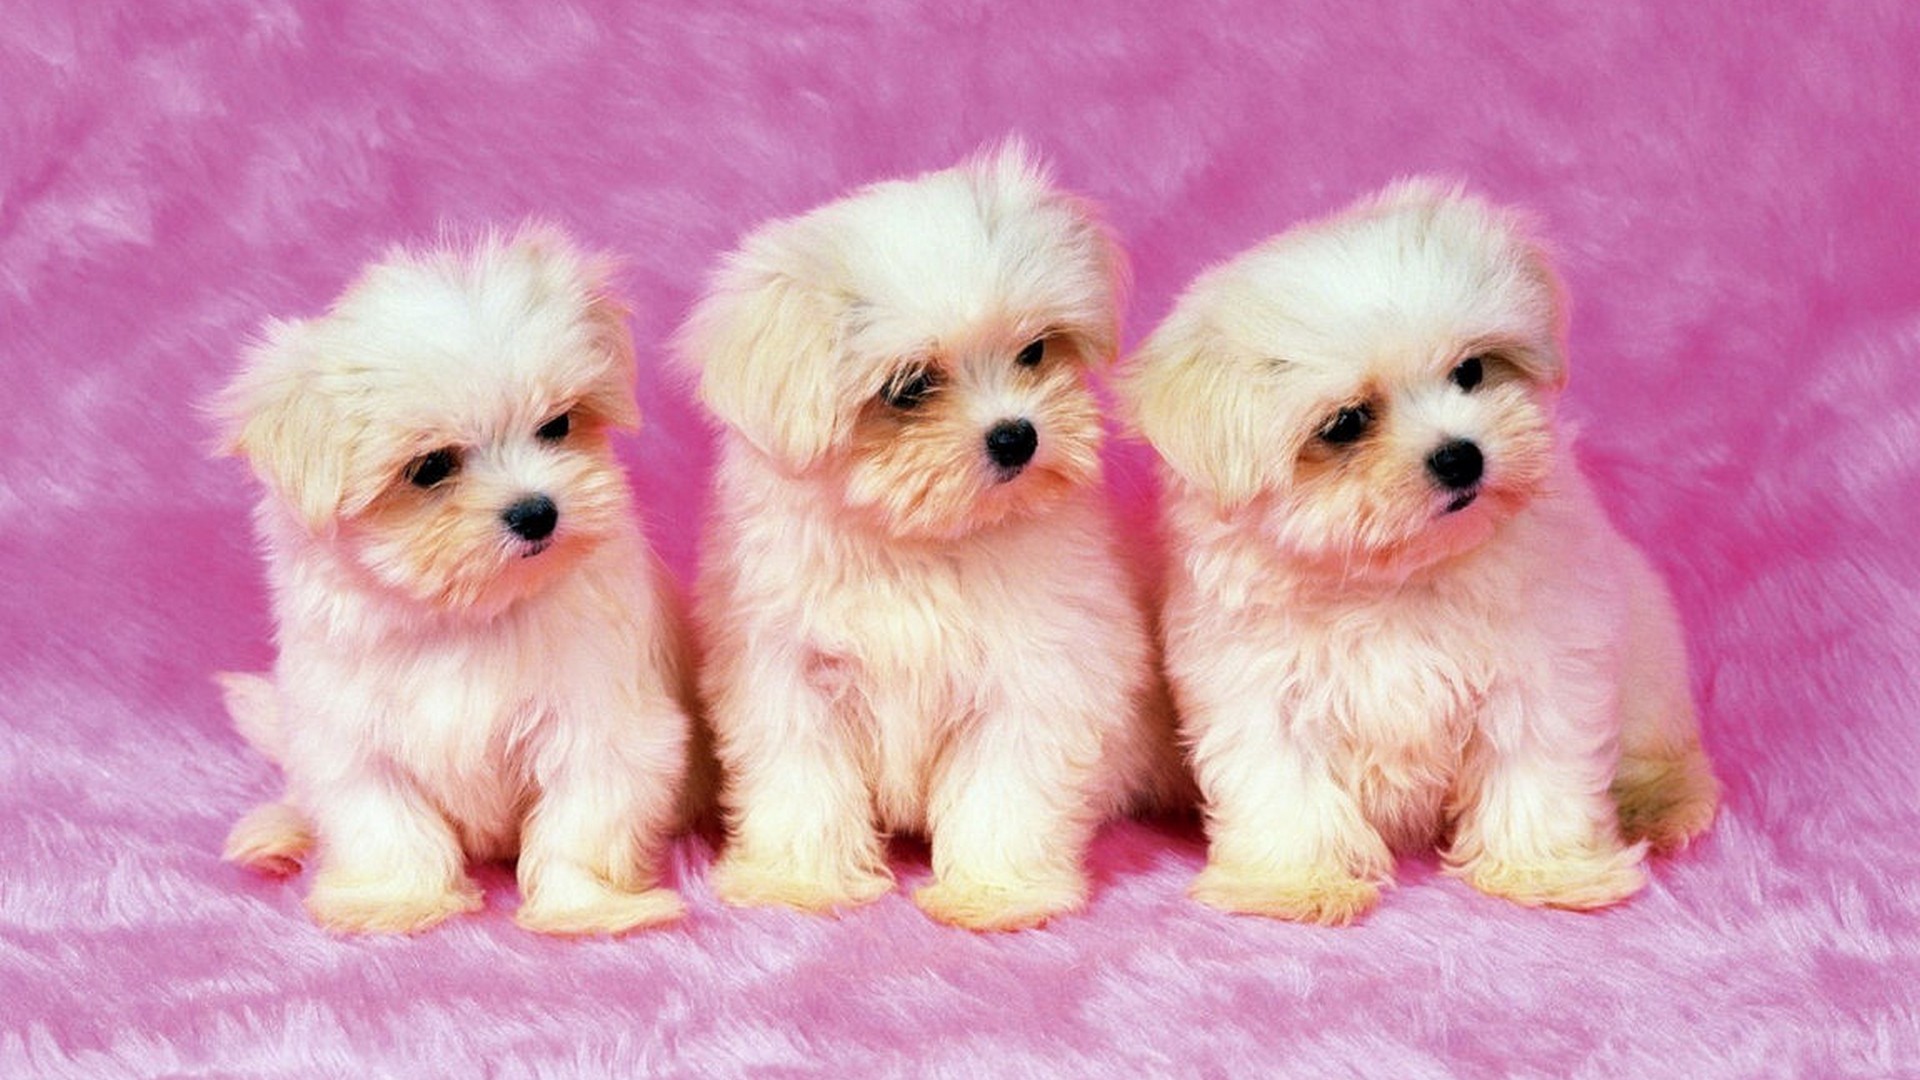 Cute Puppies Background Wallpaper HD With Resolution 1920X1080